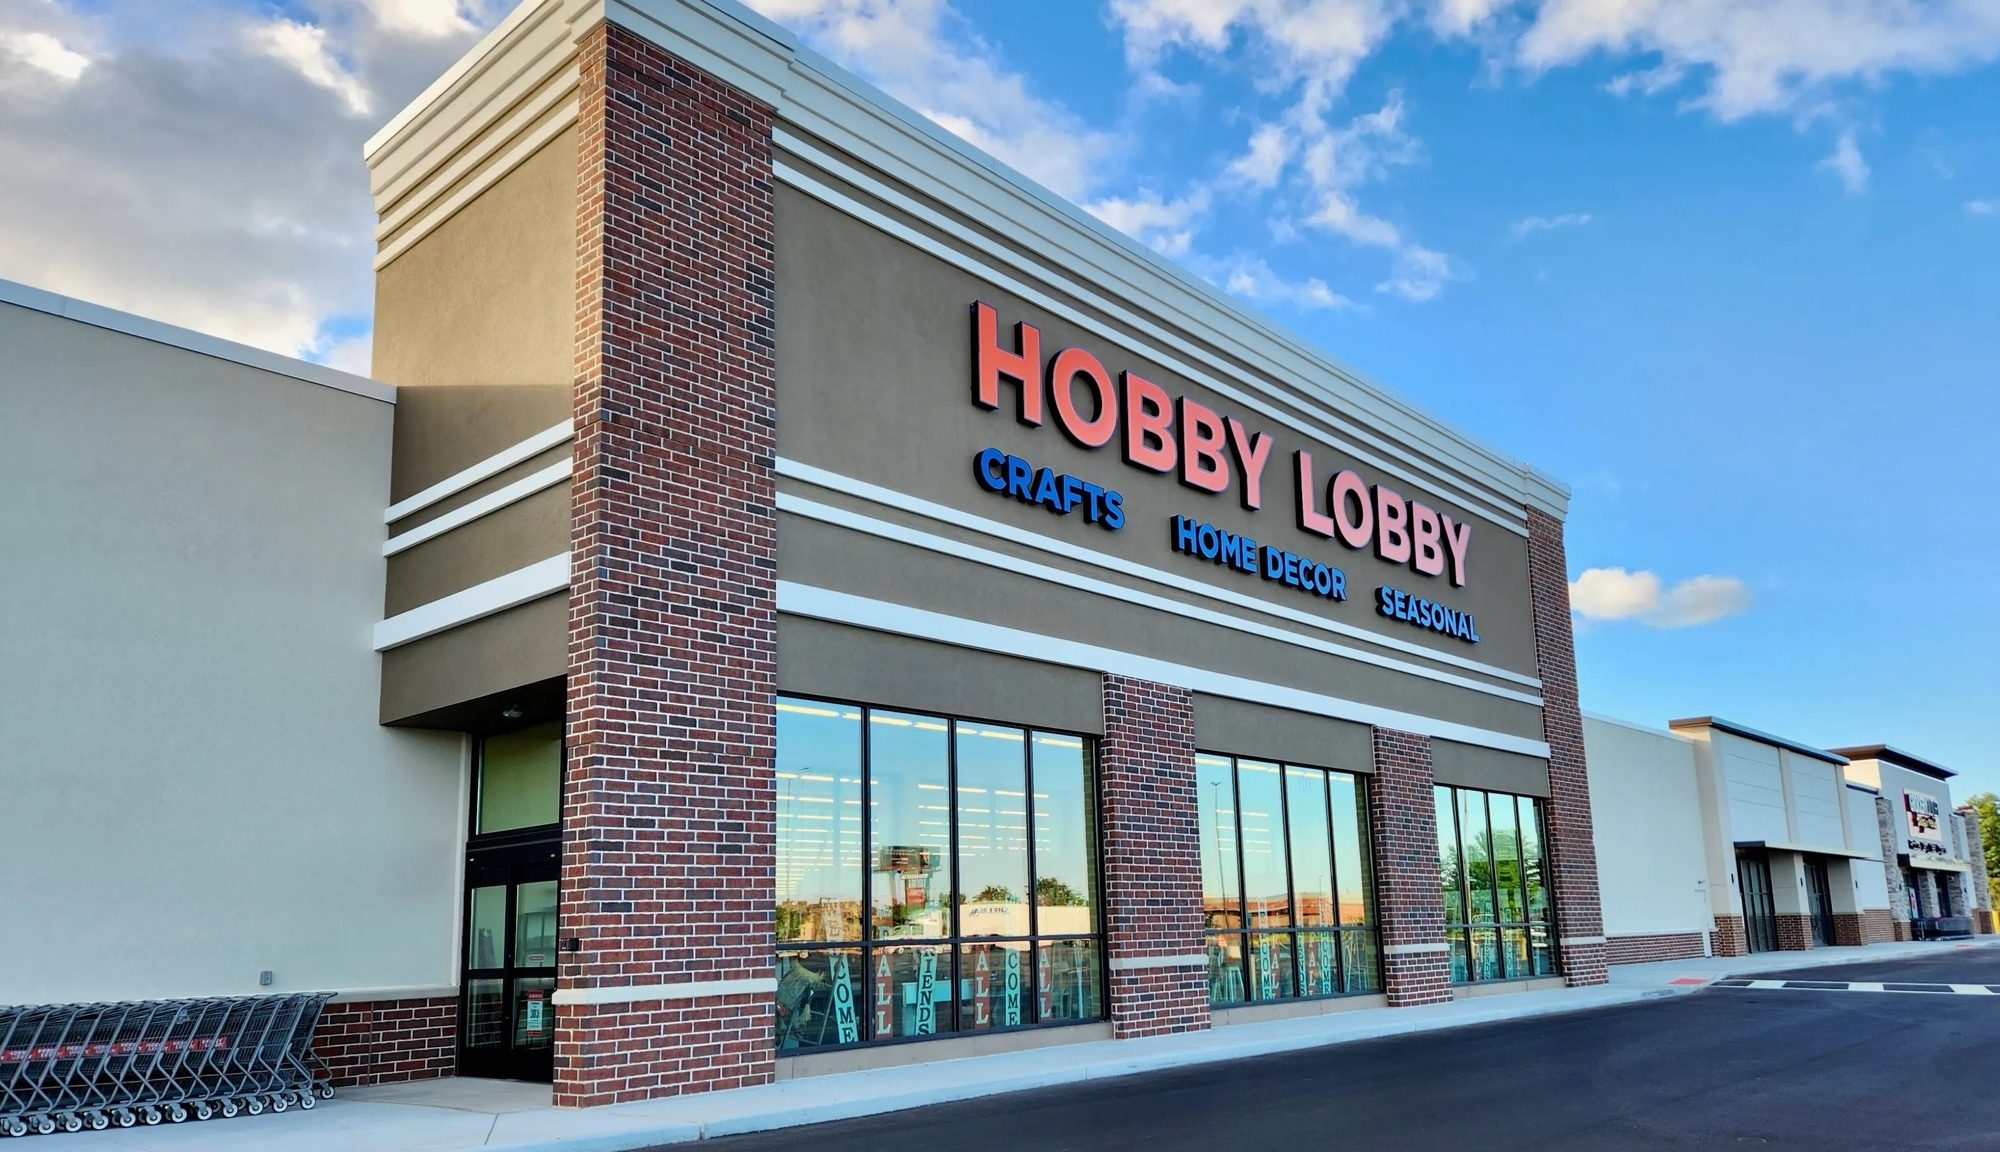 Hobby Lobby Coming Soon To Opelousas in The Former Stage Space, Next To